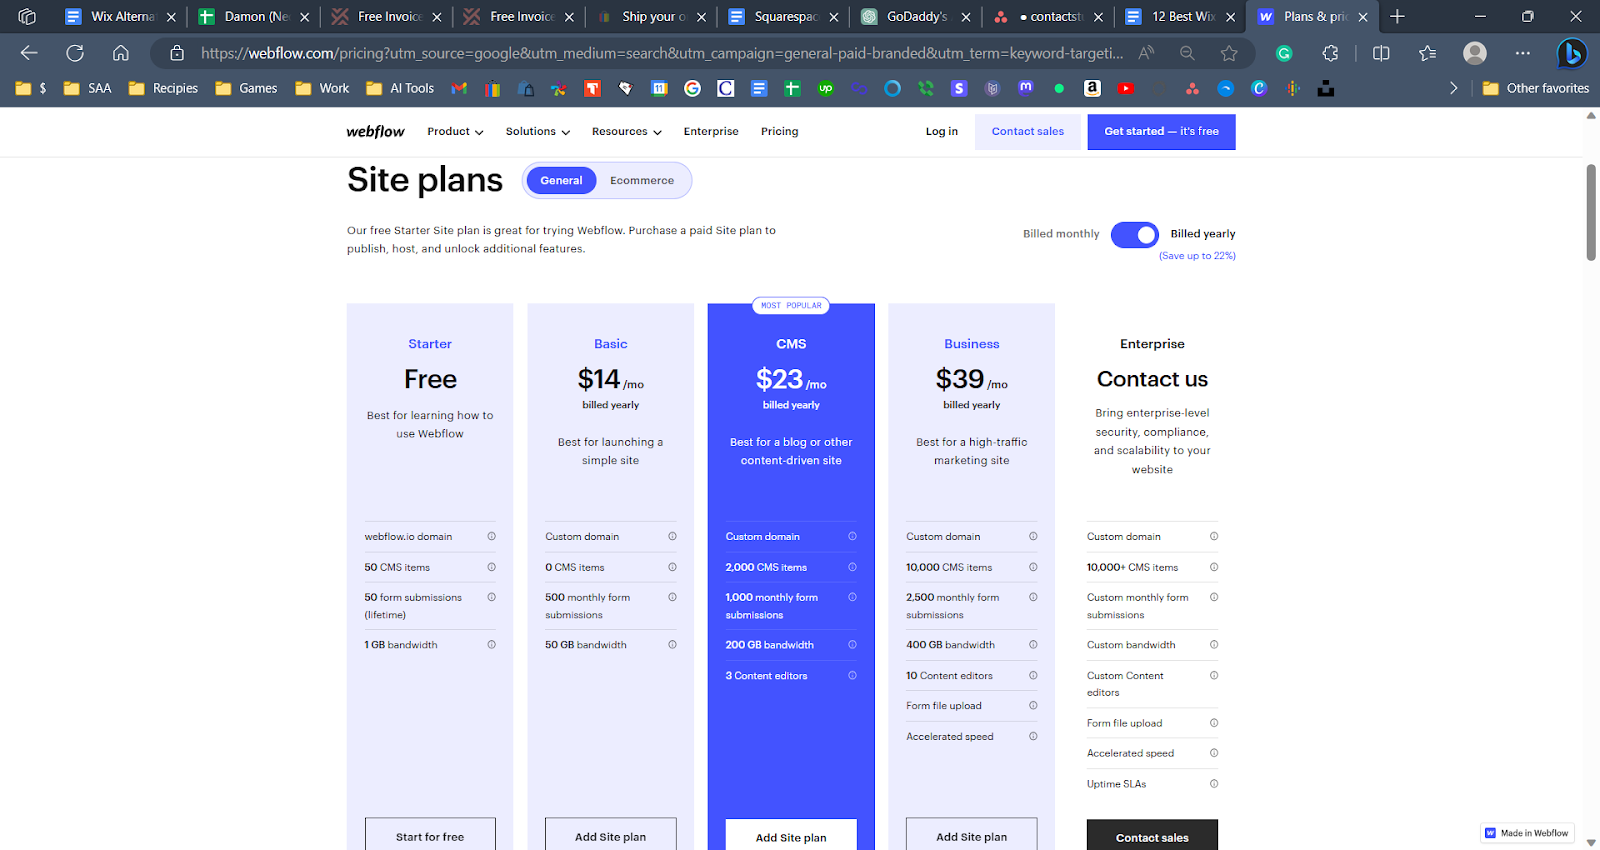 A screenshot of Webflow's pricing plans